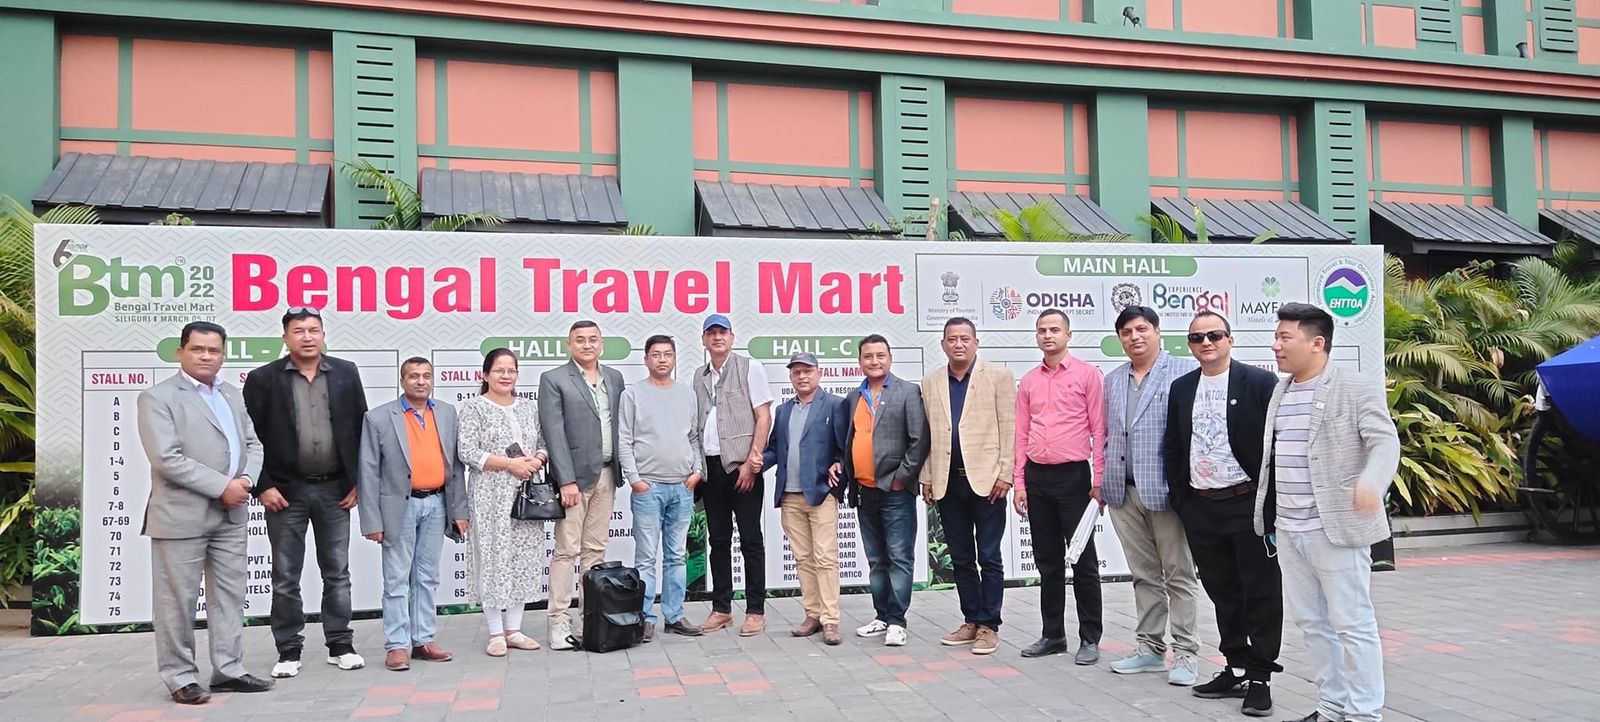 Nepali businessmen in India to promote tourism in State 1